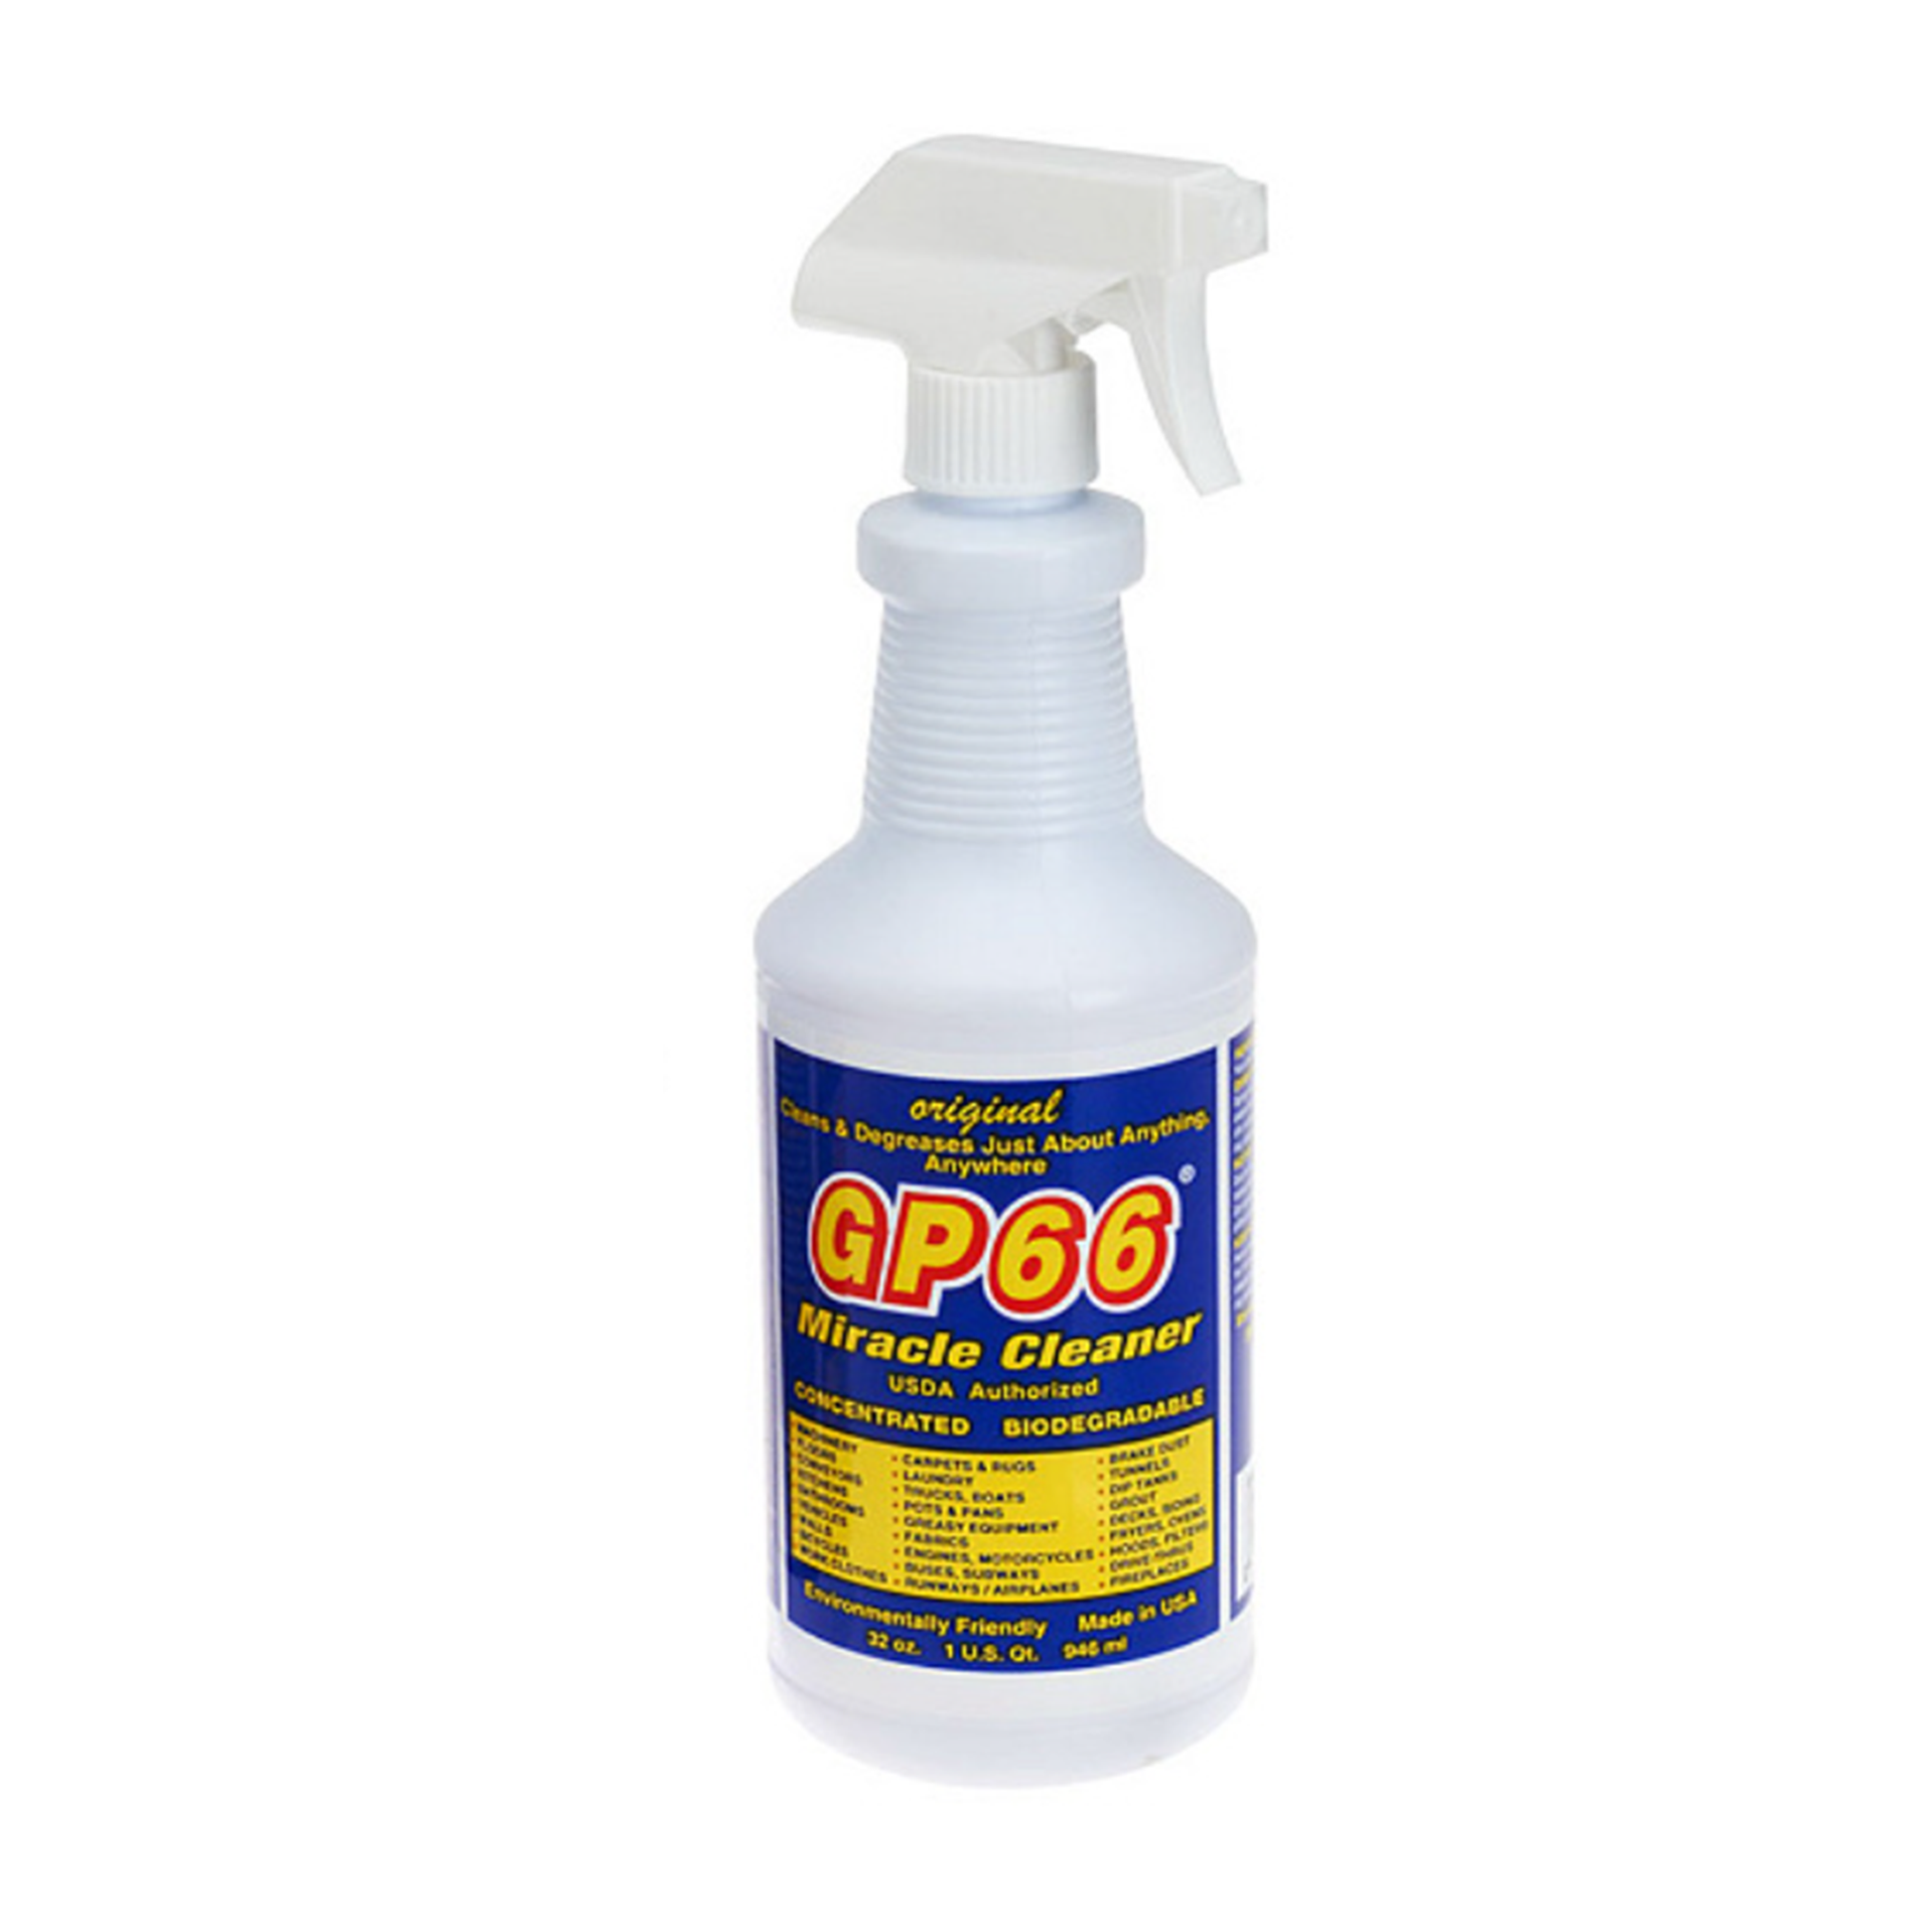 GP66 miracle cleaner super size from GP66  one quart cleans and degreases the toughest dirt, grease, and grime from just about anything anywhere in your kitchen, bath, and laundry! Made in USA